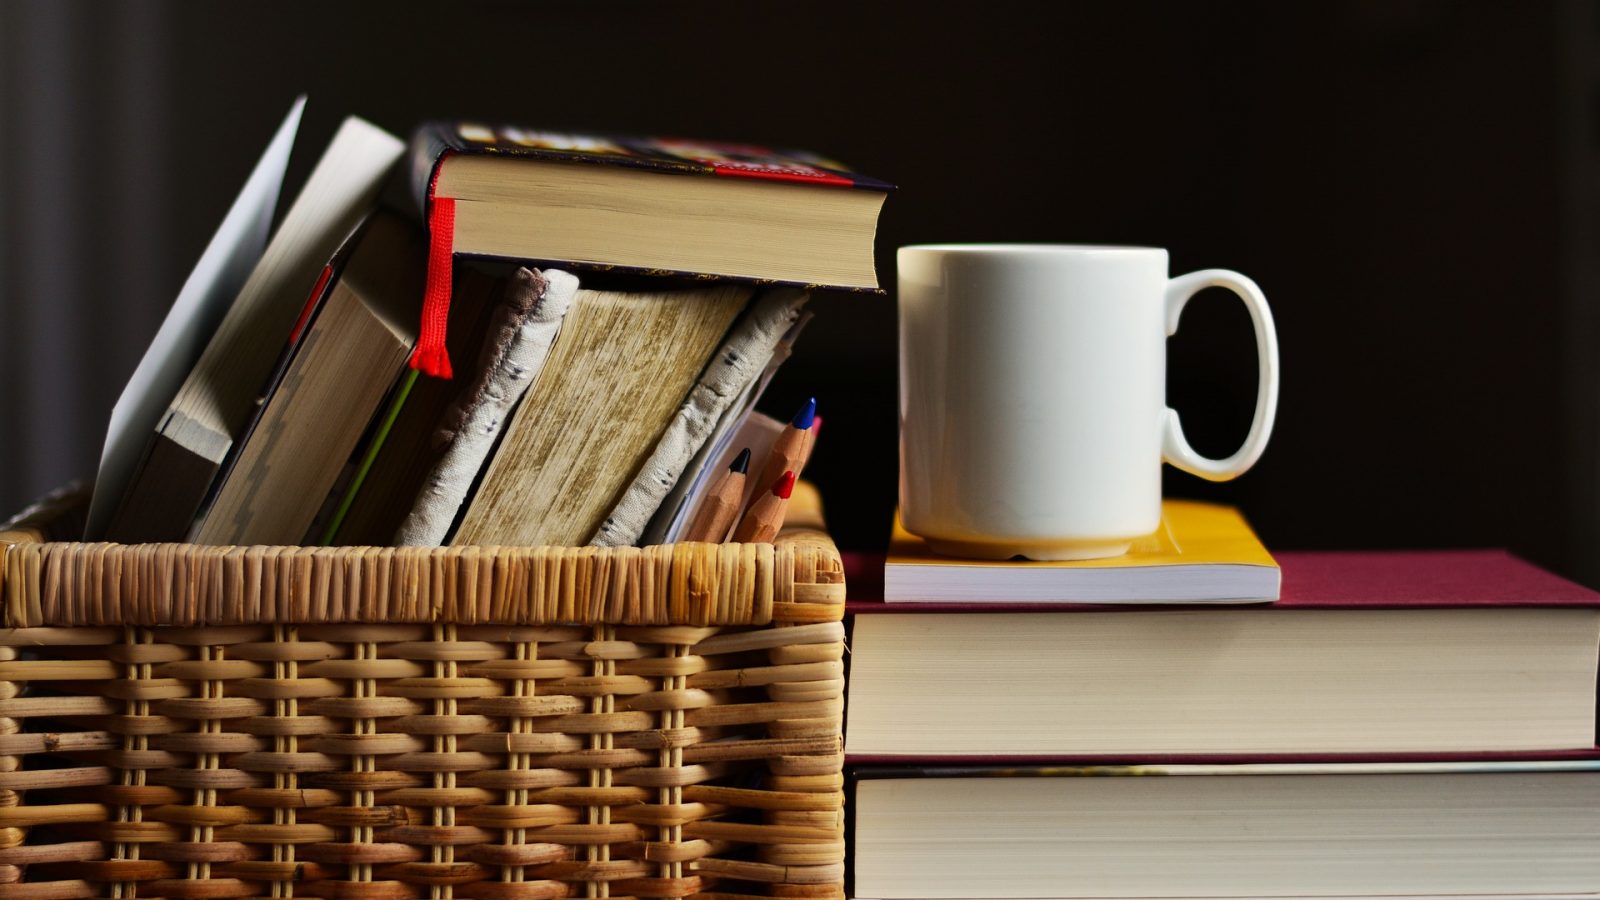 italian books and coffe cup